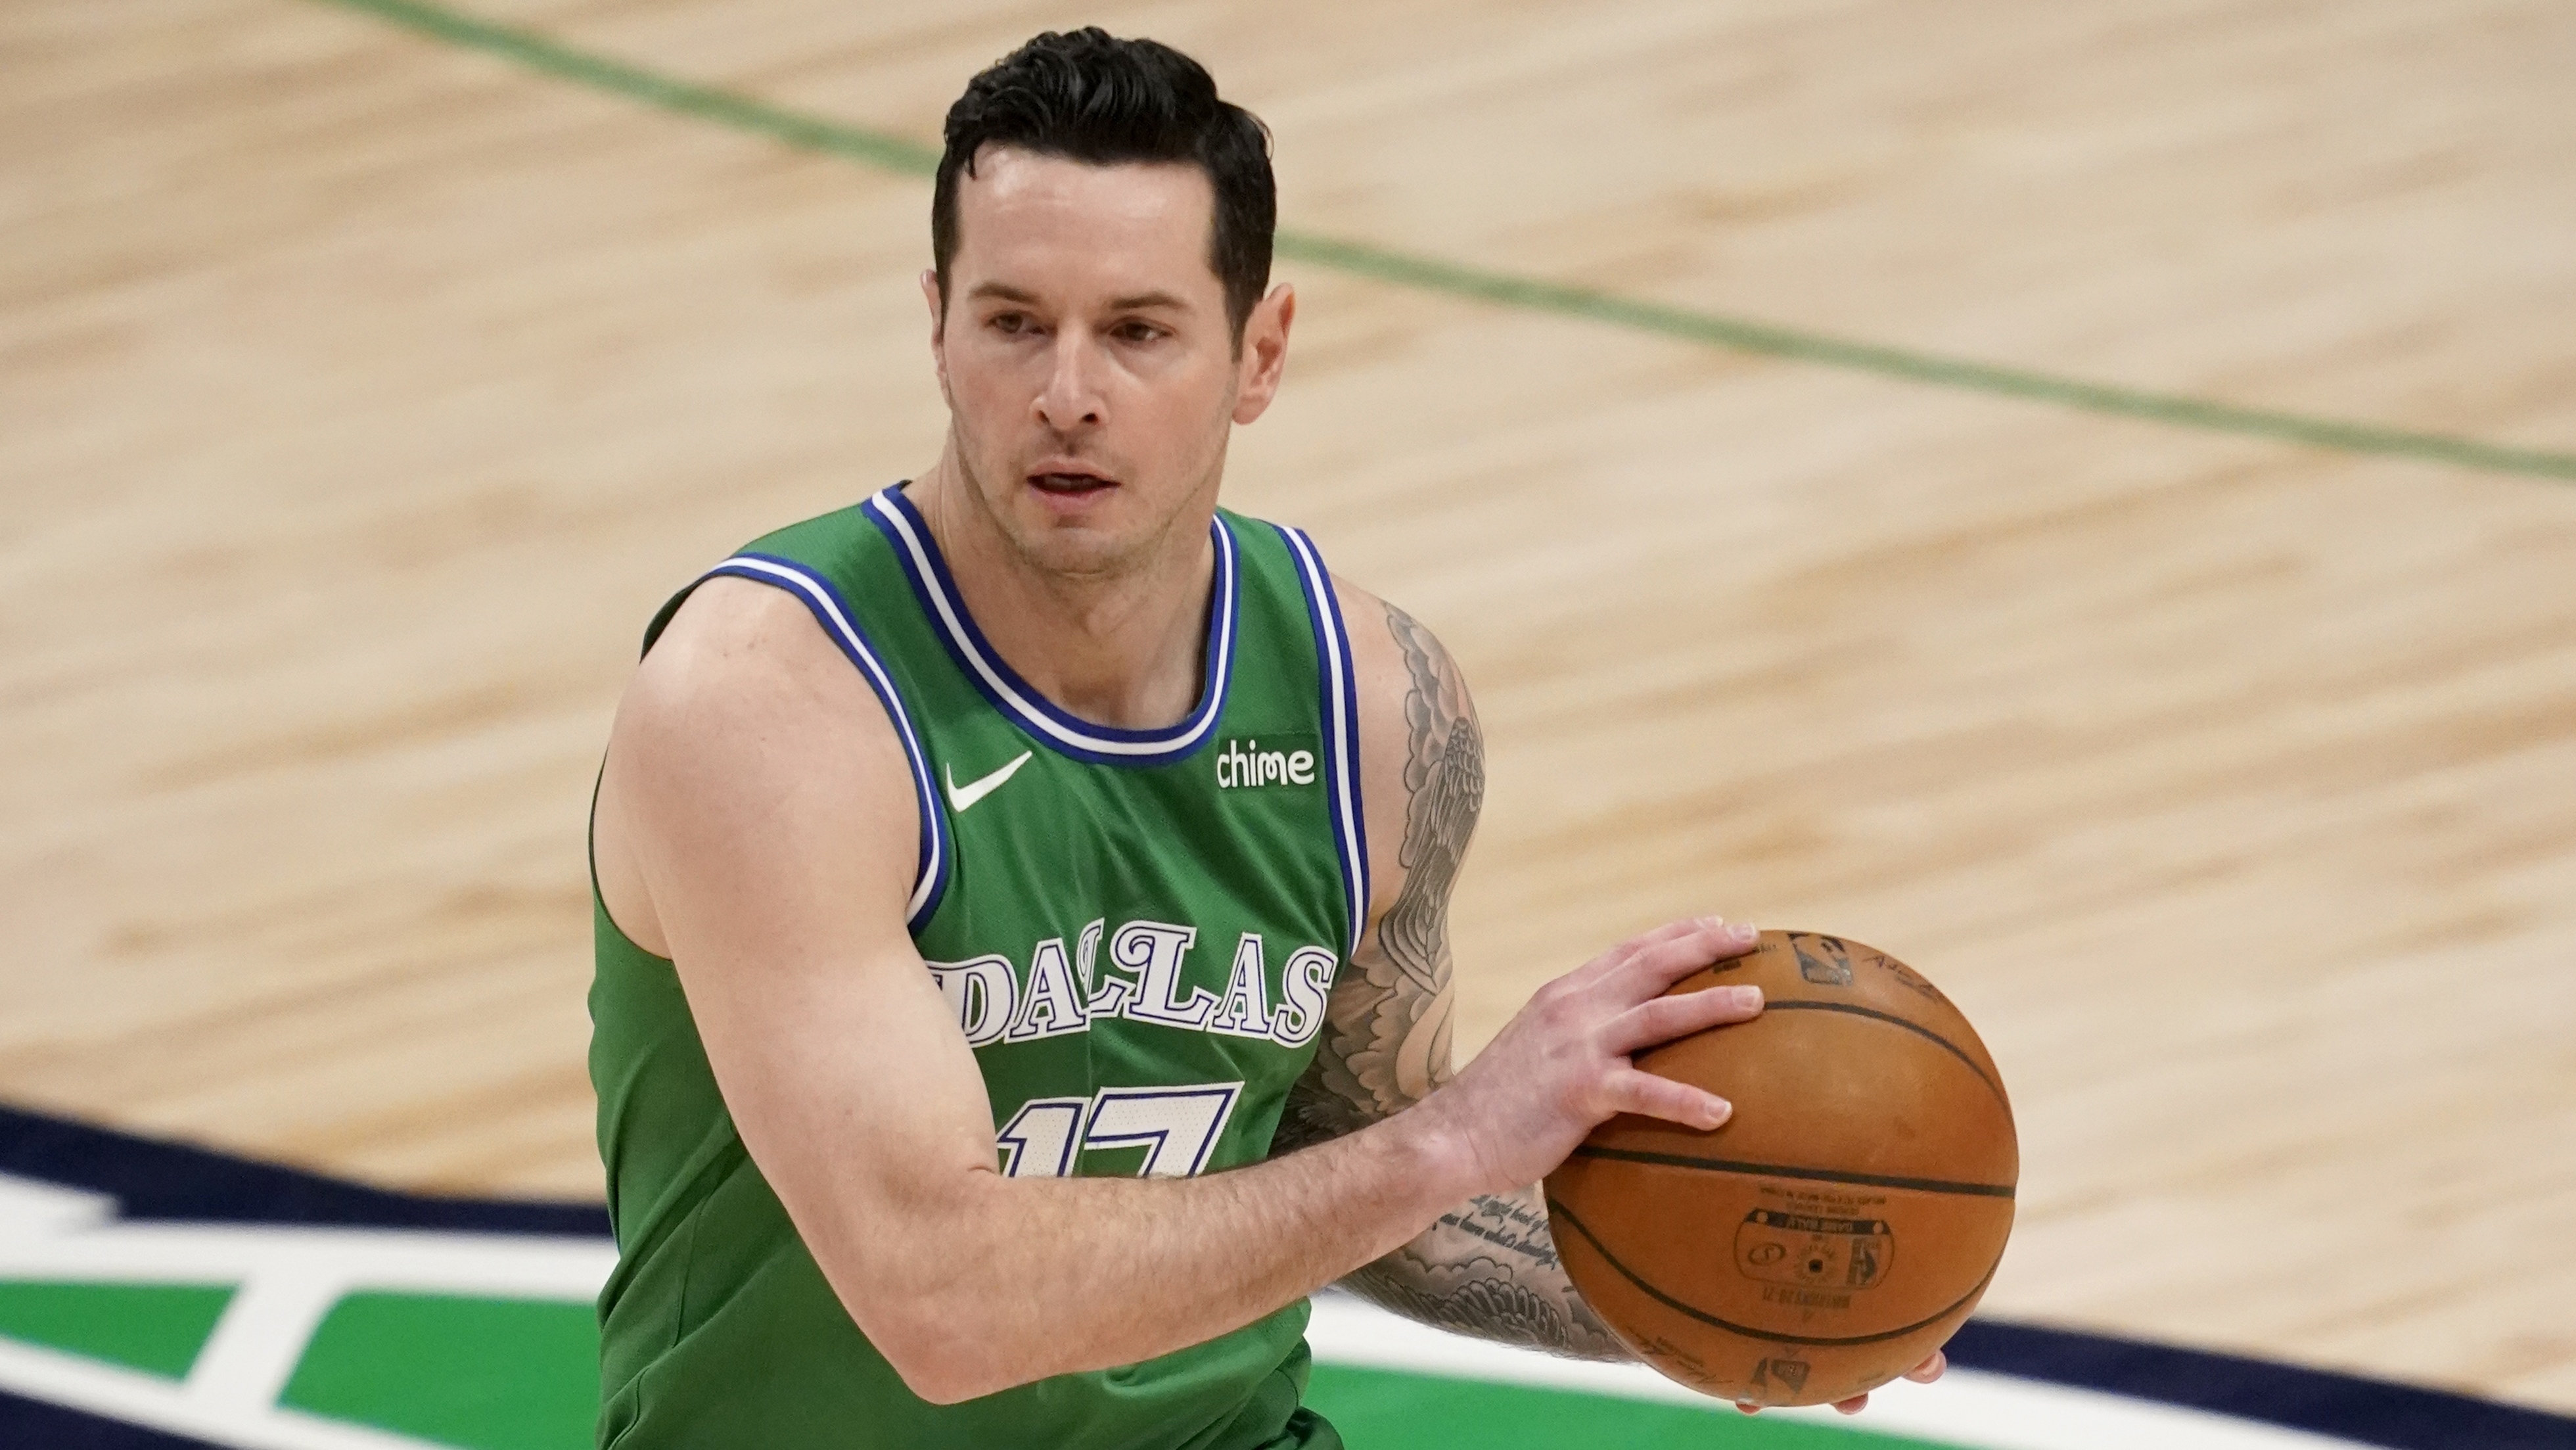 Why JJ Redick almost quit basketball during his sophomore year at